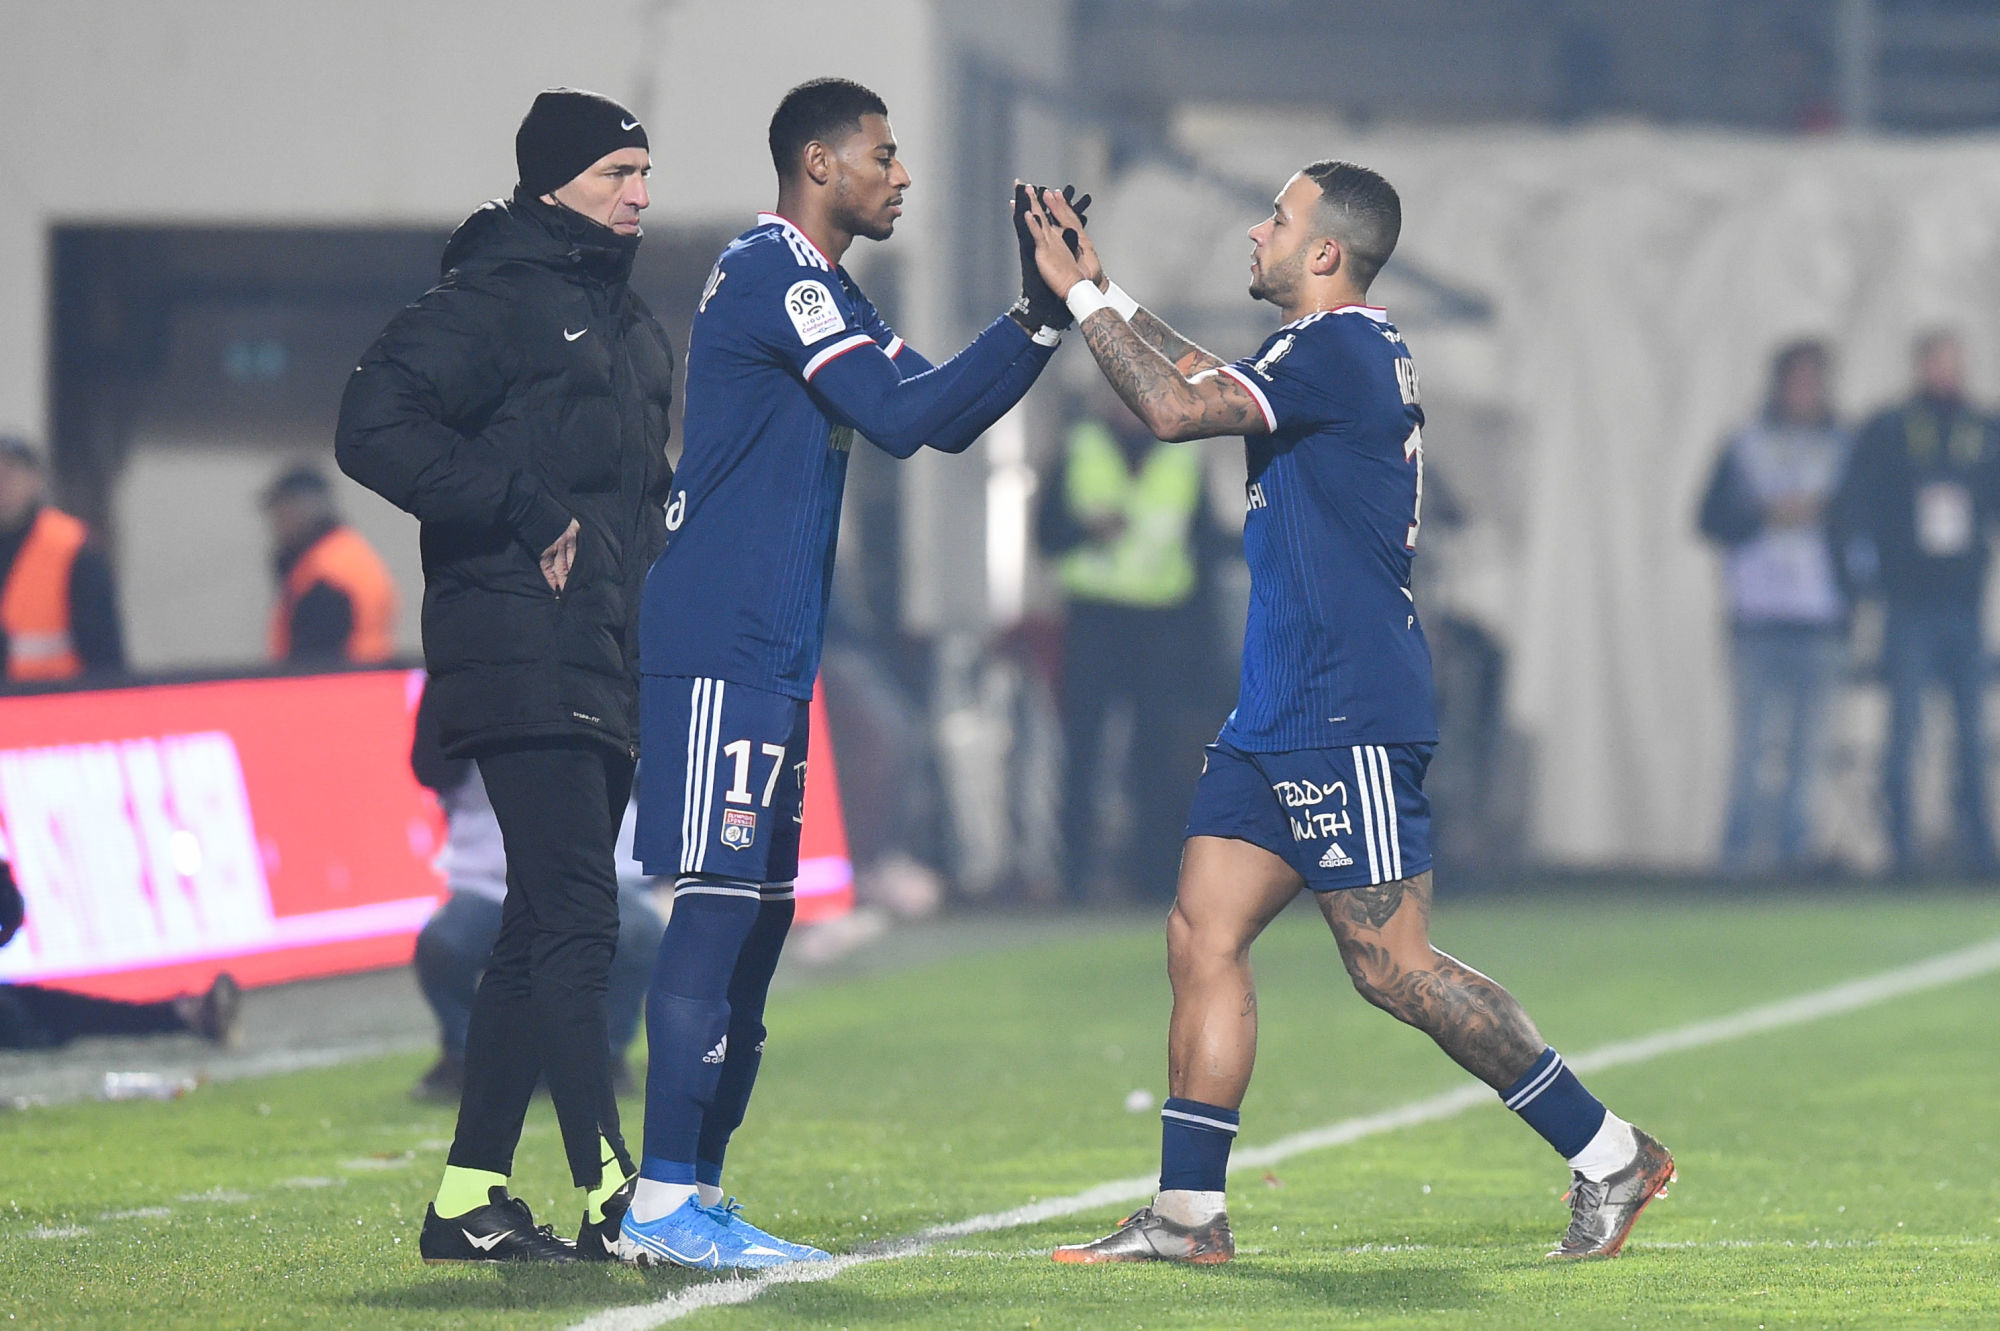 Jeff REINE-ADELAIDE of Lyon and Memphis DEPAY of Lyon  during the Ligue 1 match between Nimes and Lyon on December 6, 2019 in Nimes, France. (Photo by Alexandre Dimou/Icon Sport) - Memphis DEPAY - Jeff REINE-ADELAIDE - Stade des Costières - Nimes (France)